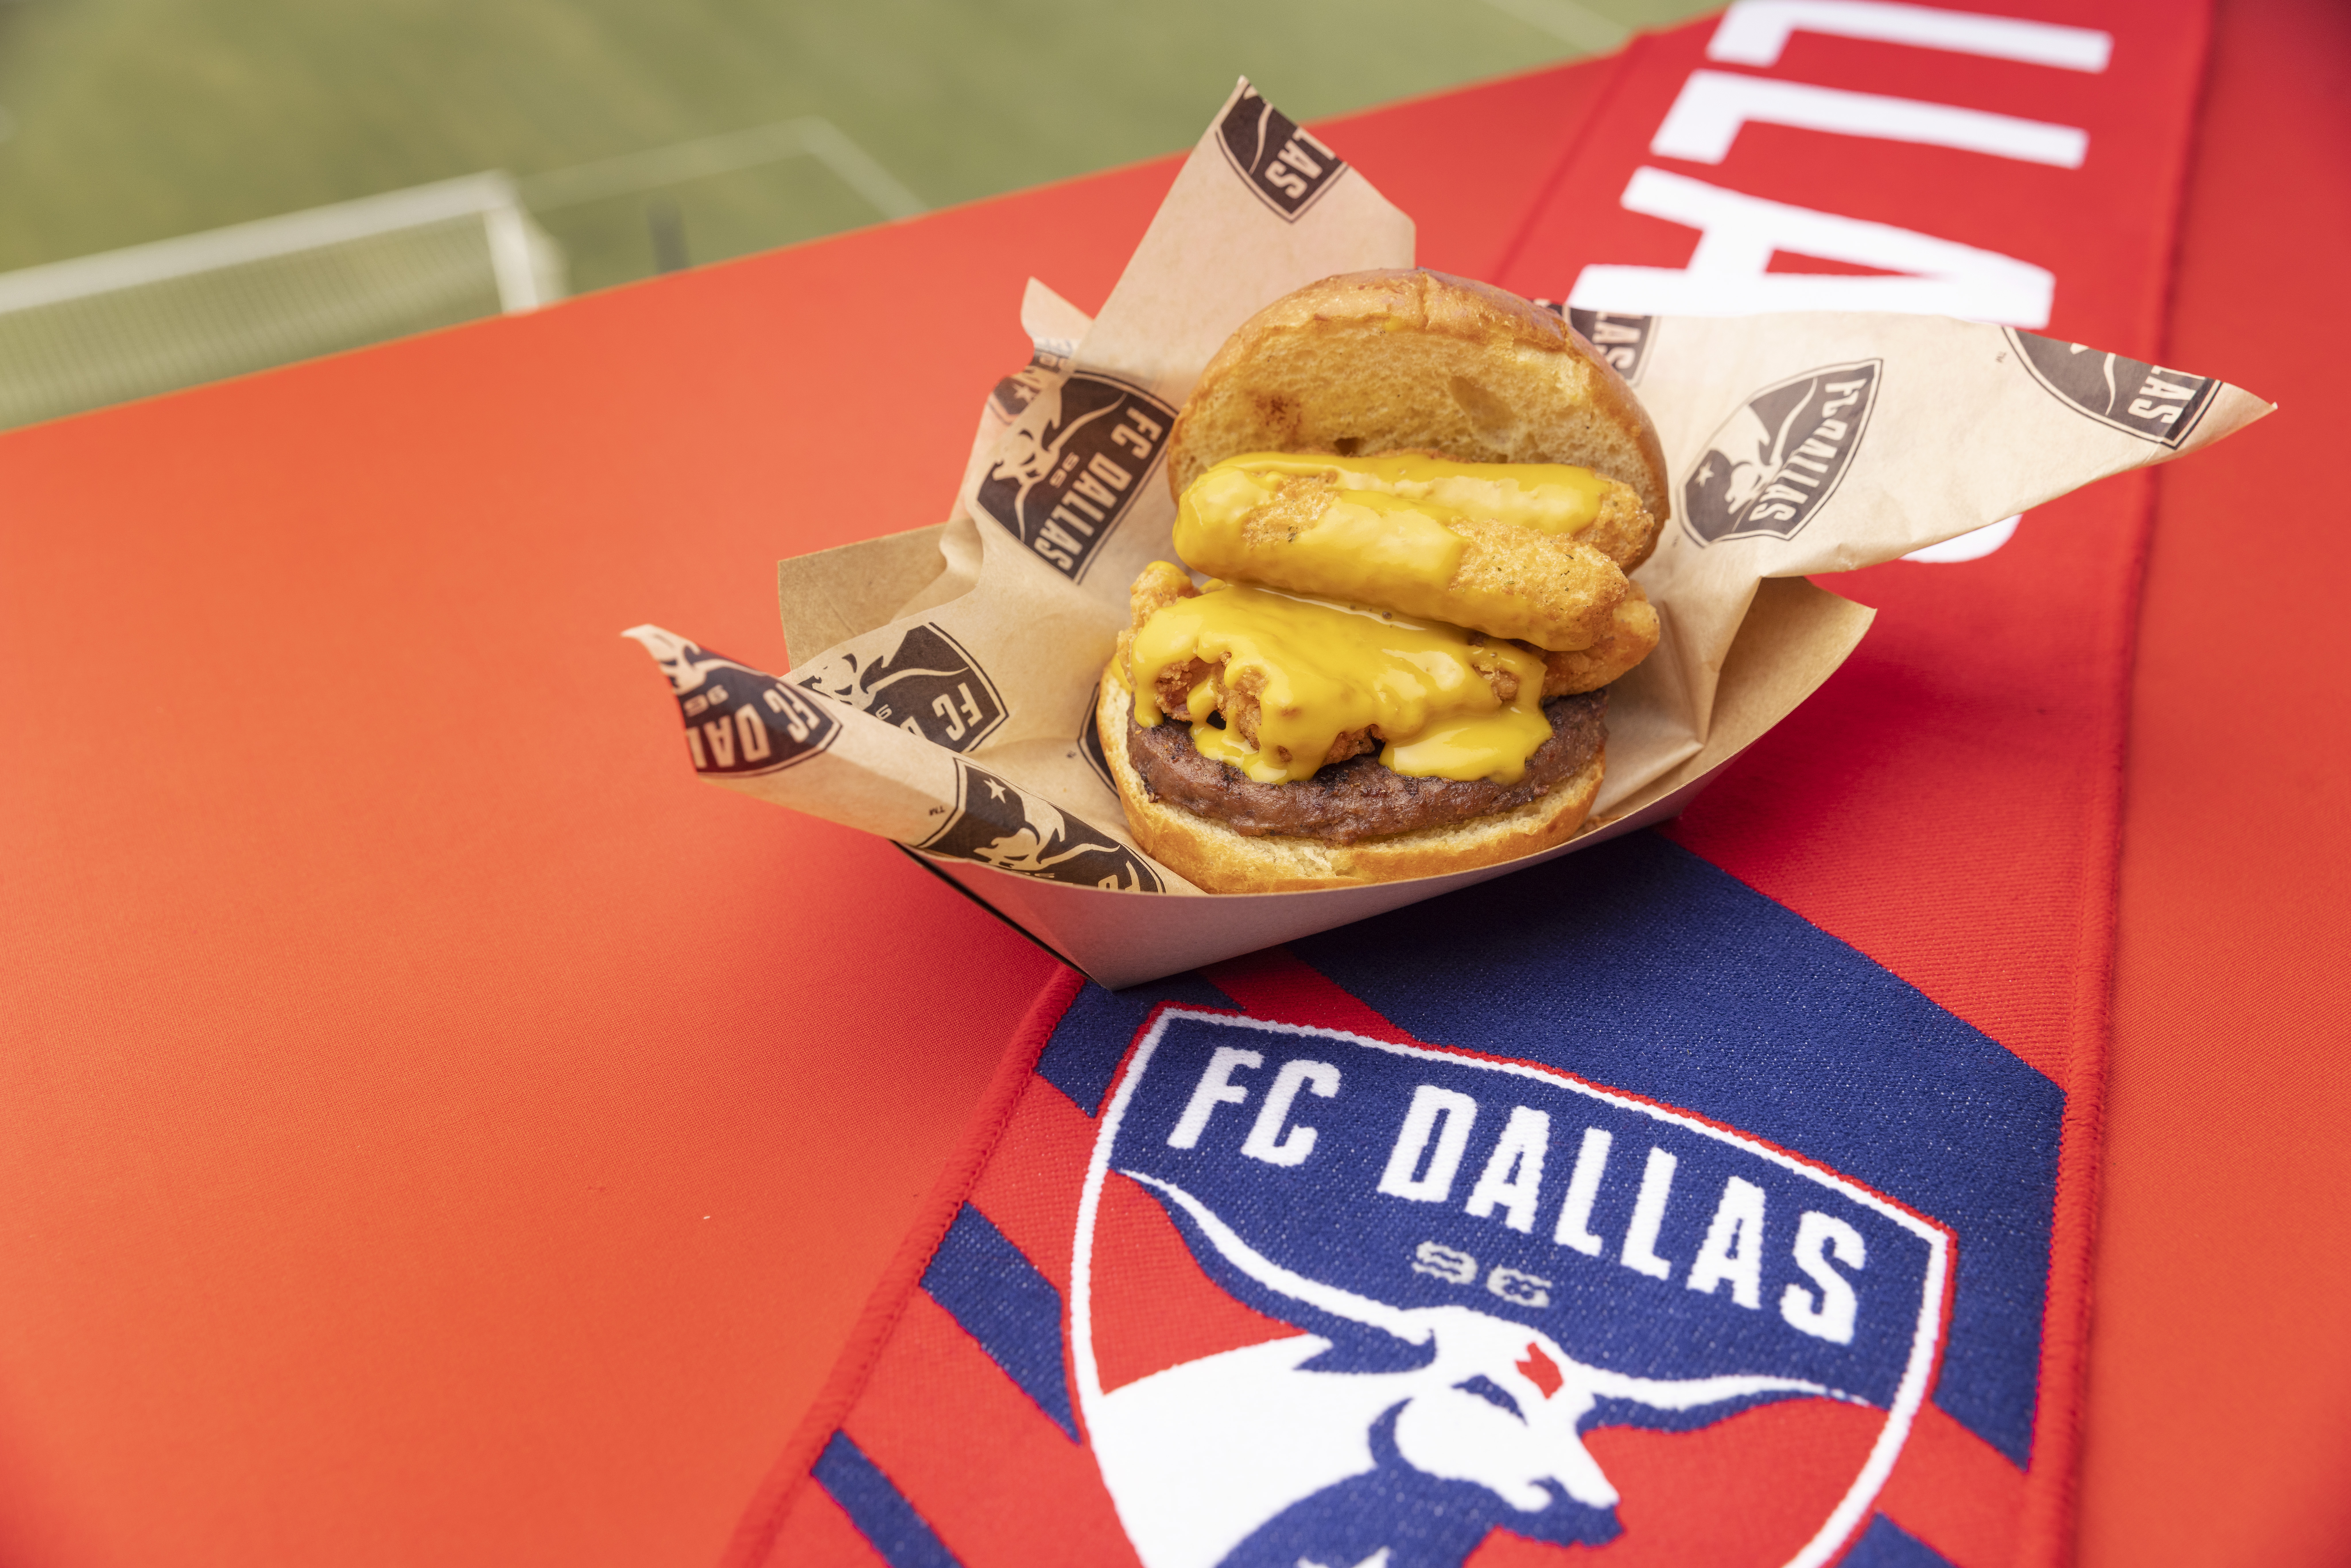 A burger topped with mozzarella sticks and honey mustard sits in a cardboard serving container, on top of a red background with the FC Dallas logo in blue and white.